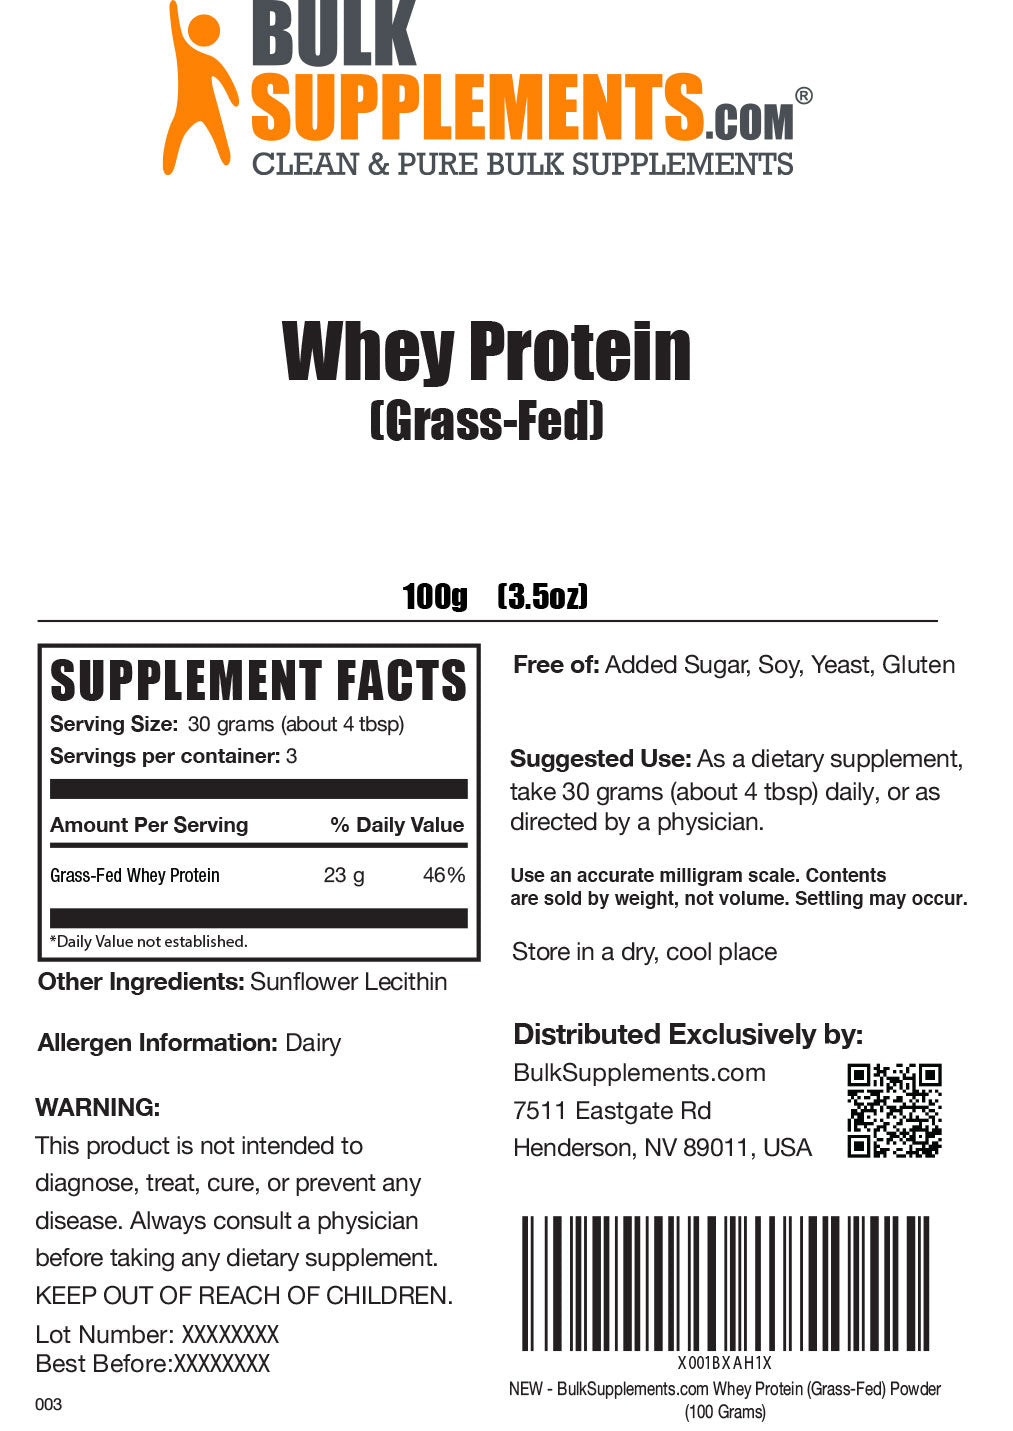 Grass-Fed Whey Protein Supplement Facts